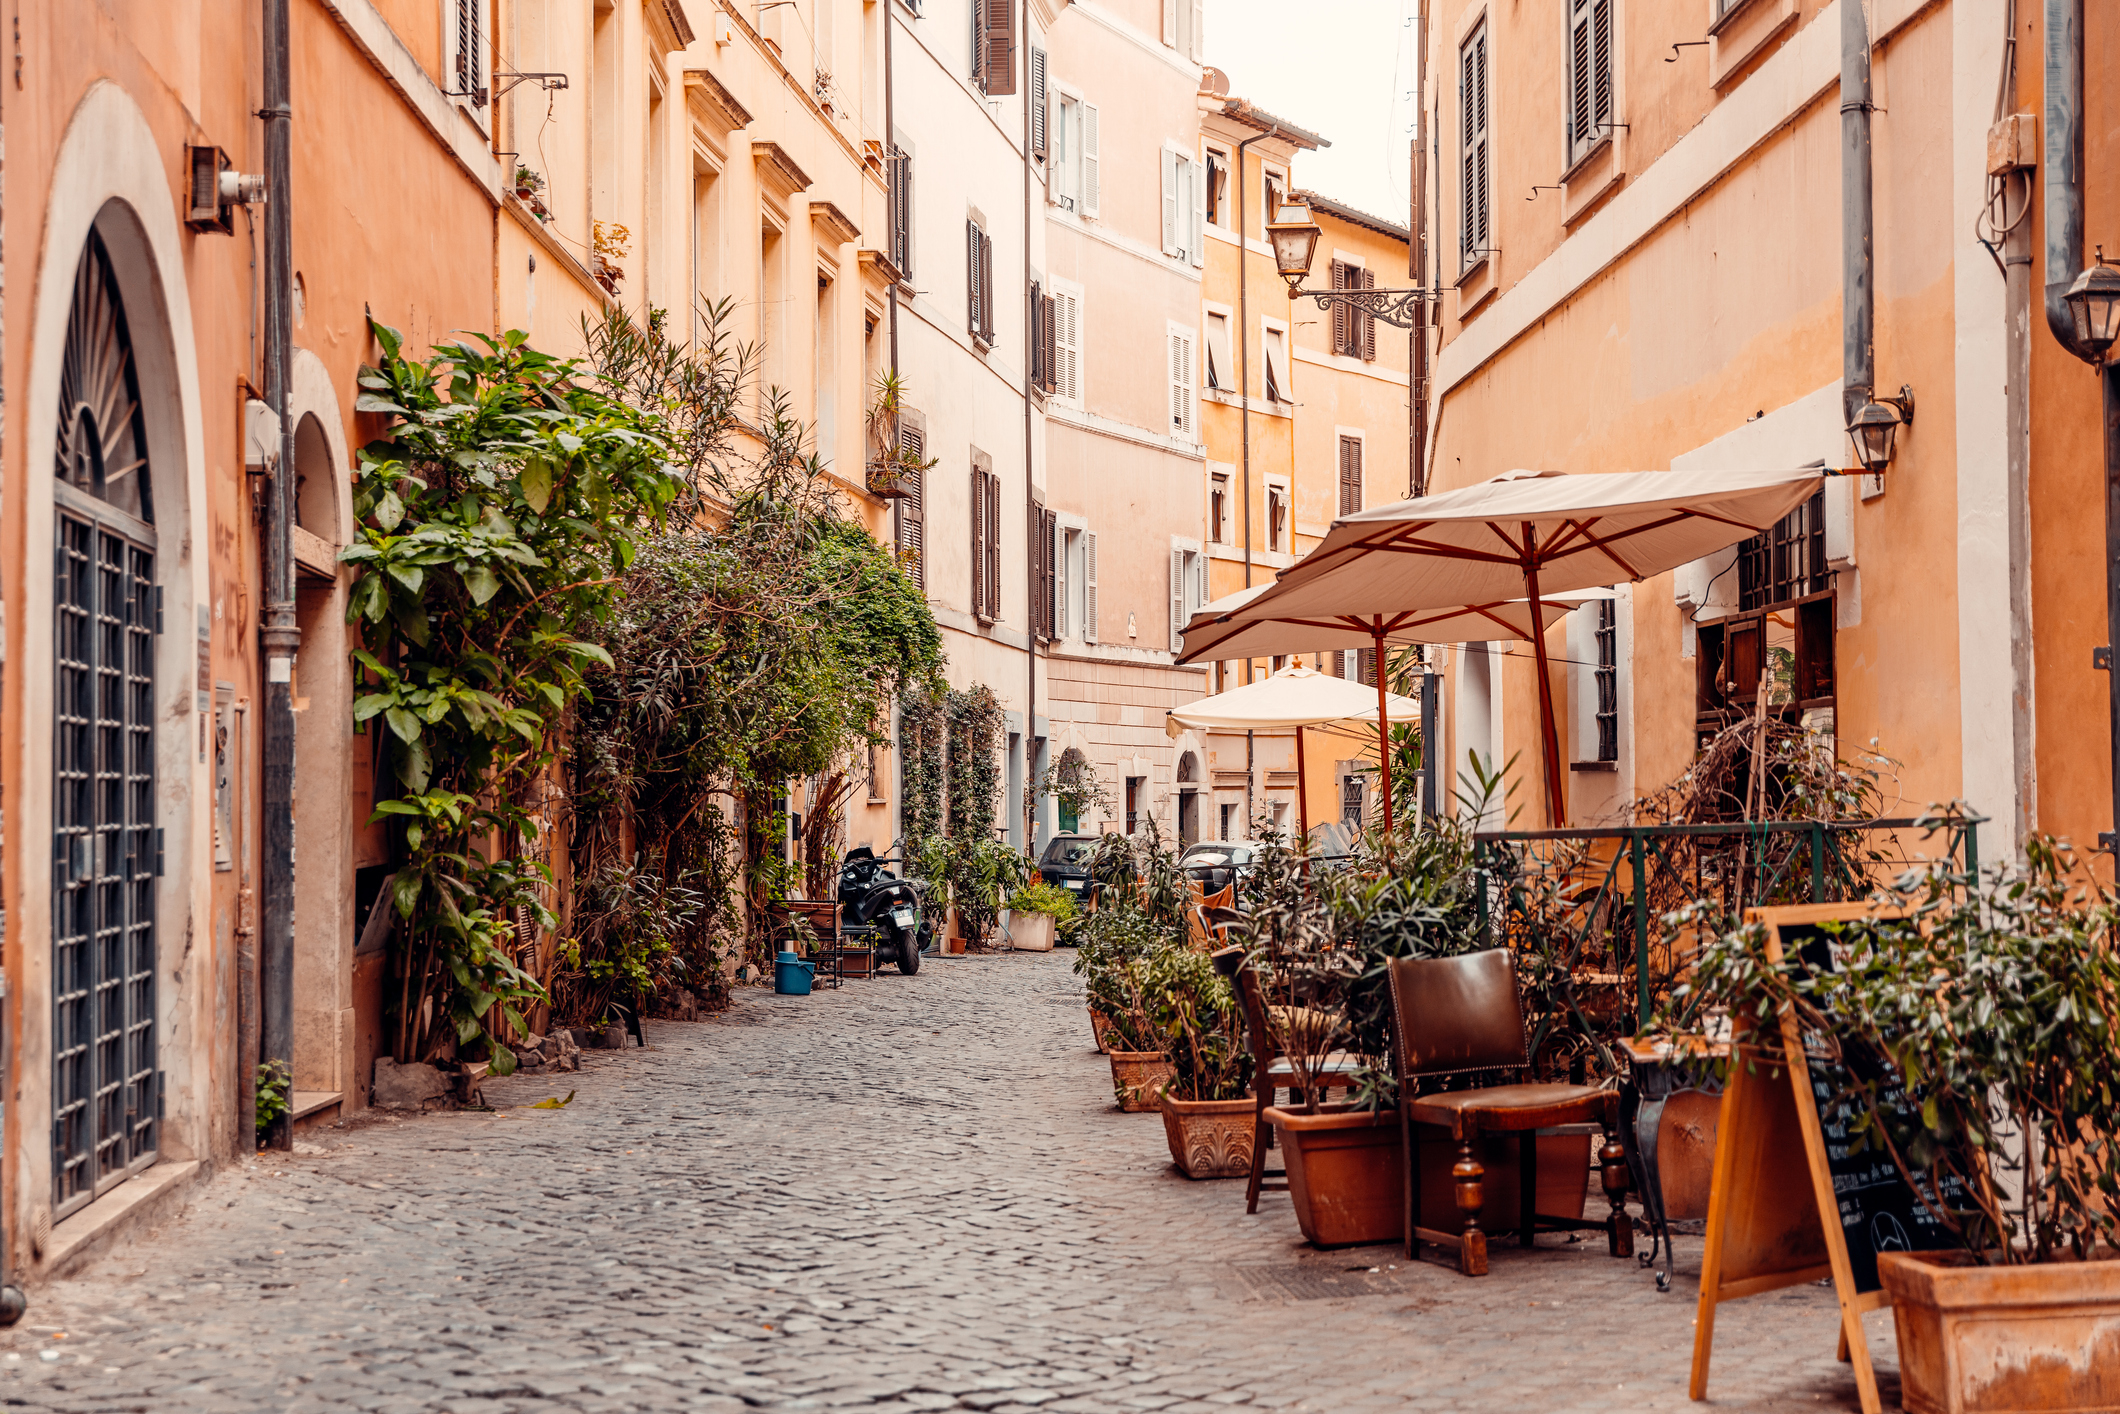 Charming narrow street with cobblestone pavement, lined with plants and café umbrella in a European city